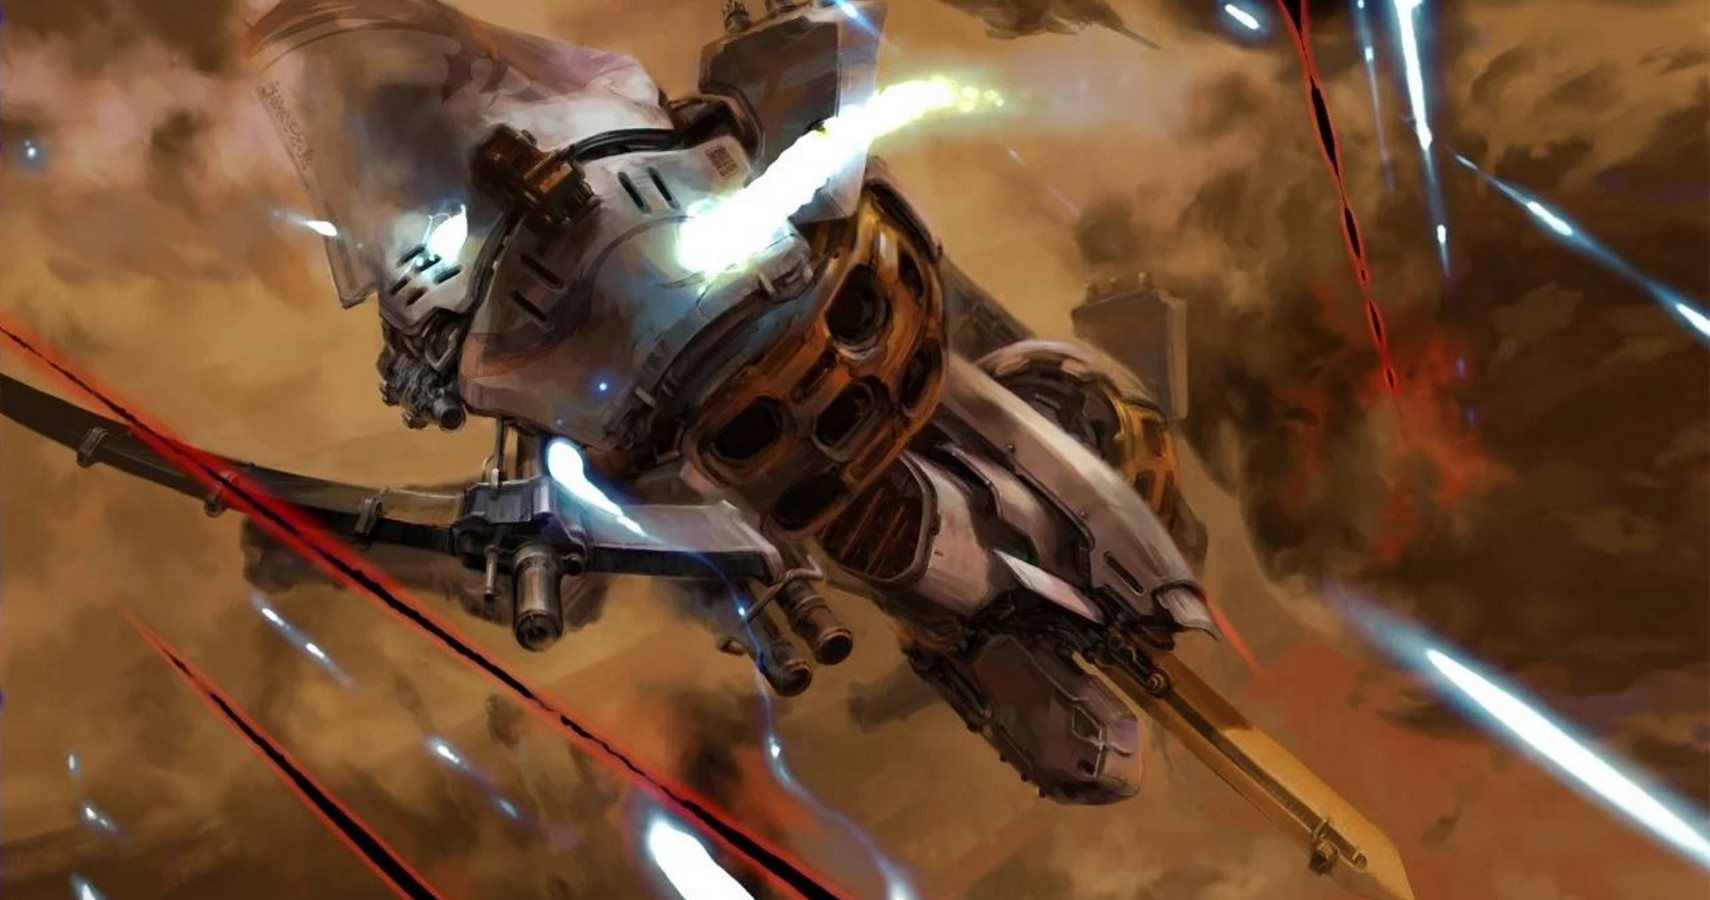 Classic Light/Dark Shmup Ikaruga Is Heading To Nintendo Switch This Month